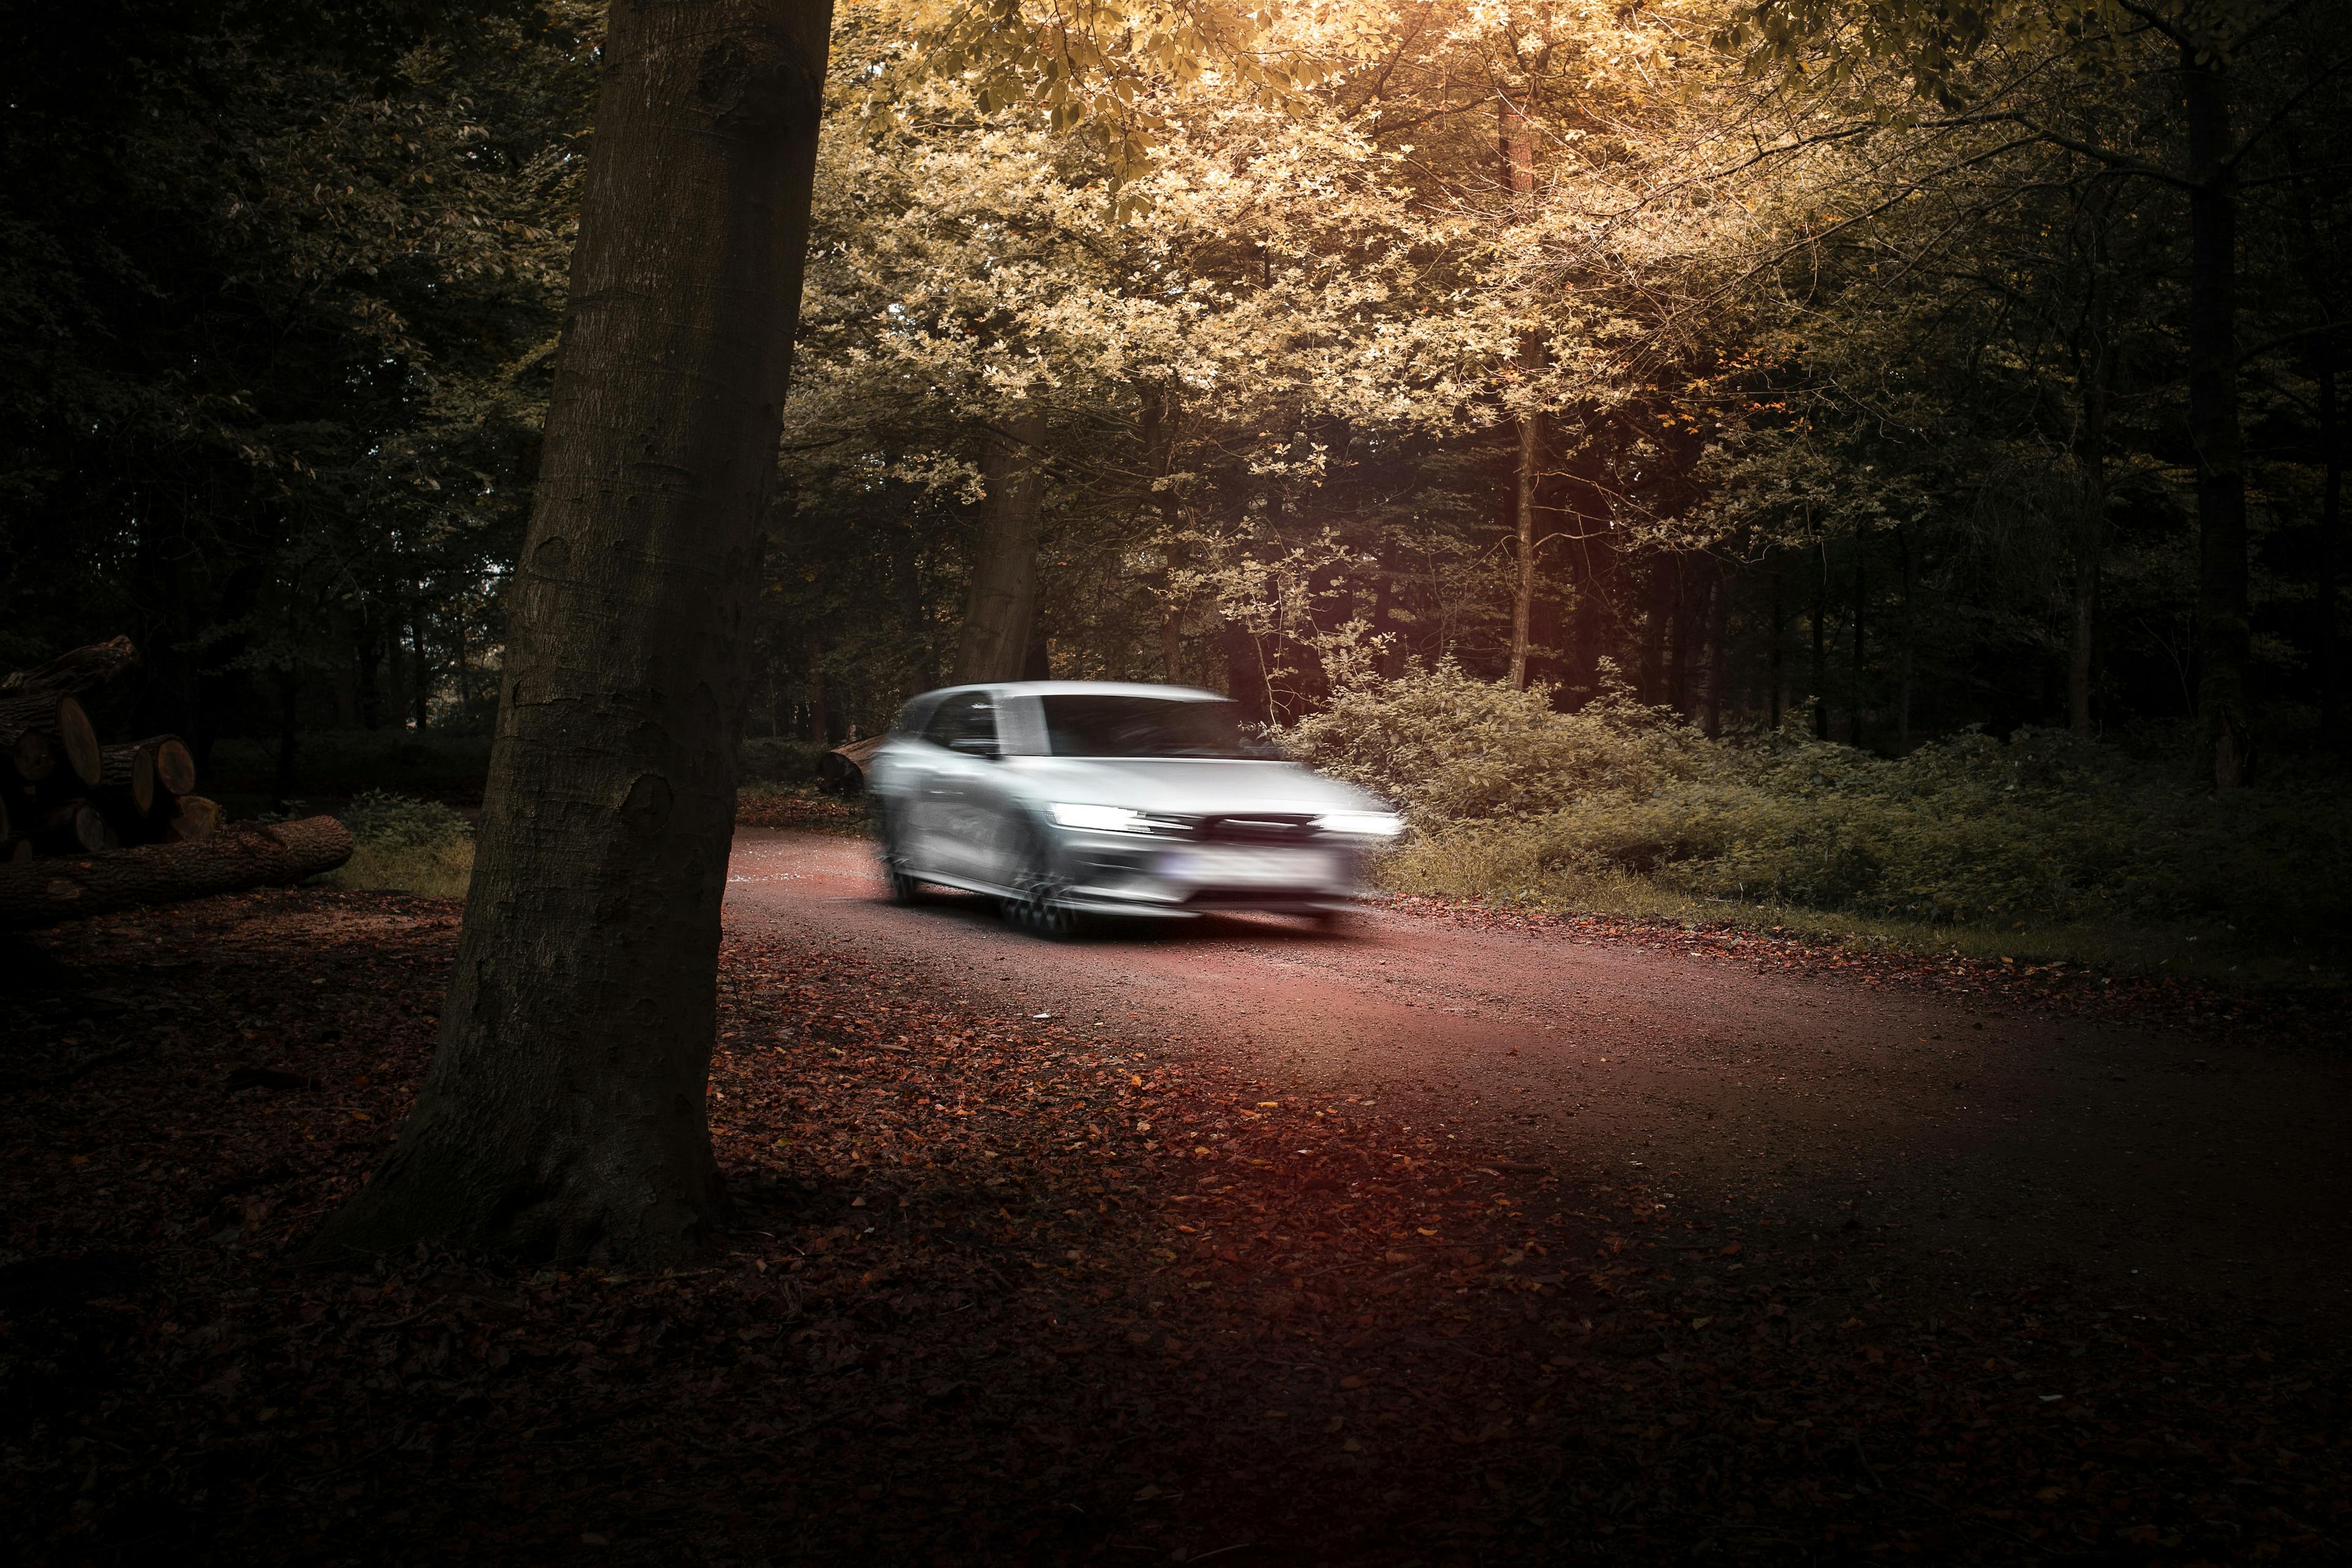 A silver sedan drives on a deserted dirt road surrounded by leafy green trees. The car is blurry and out of focus, while the surrounding forest is clear and in focus.